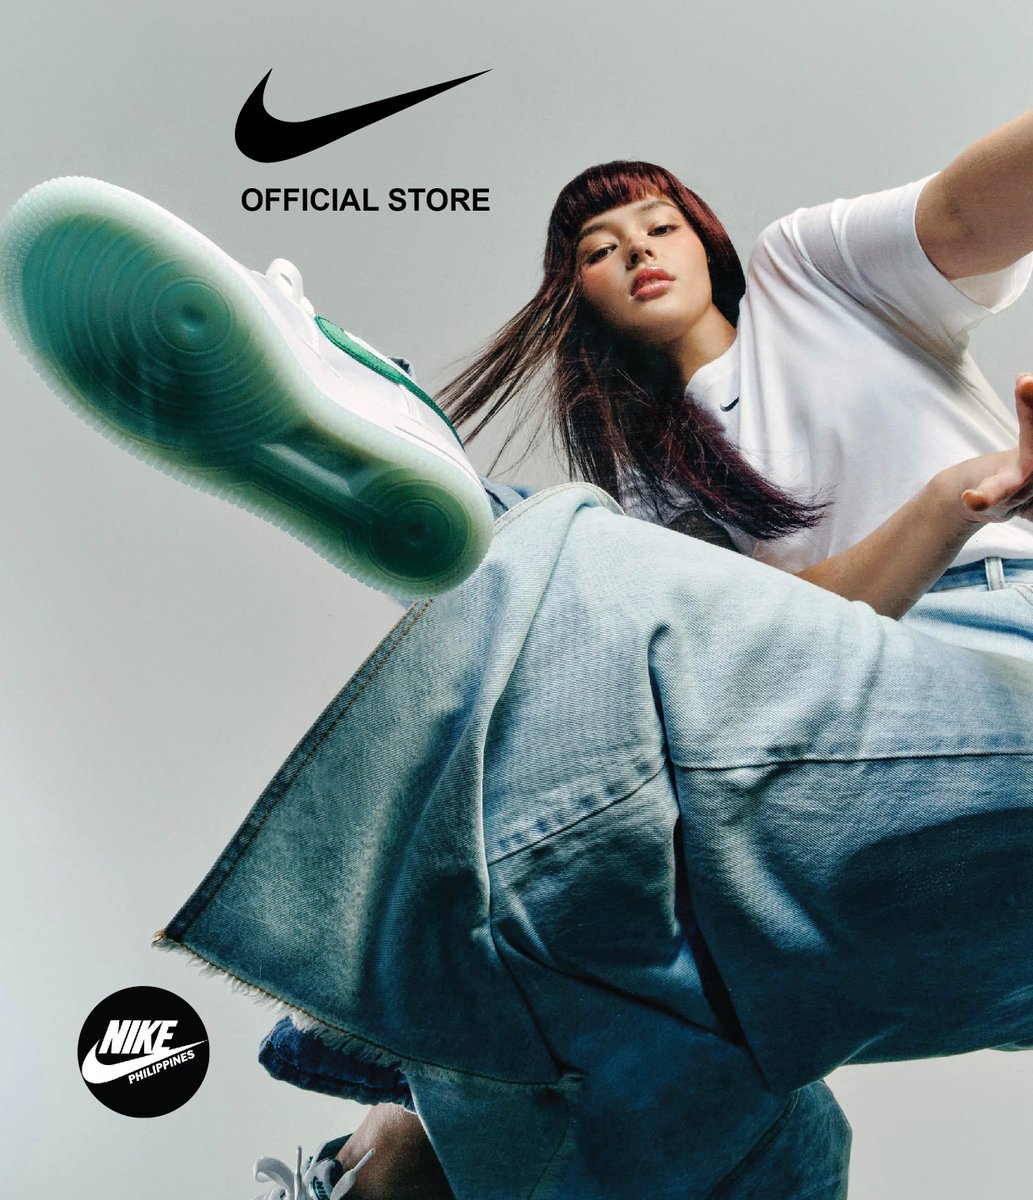 FIND YOUR AIR MAX 
SHOP NOW: invol.co/clkxqwl 
Elevate your fit with Air Max styles made for going big and going bold.   
#Nike #NikePH #NikePH5 #NikeSportsPH #NikePHStore #NikeAir #NikeAirMax #Air #AirMax #Liza #Lisa #Soberano #Hope #LizaSoberano #Shoes